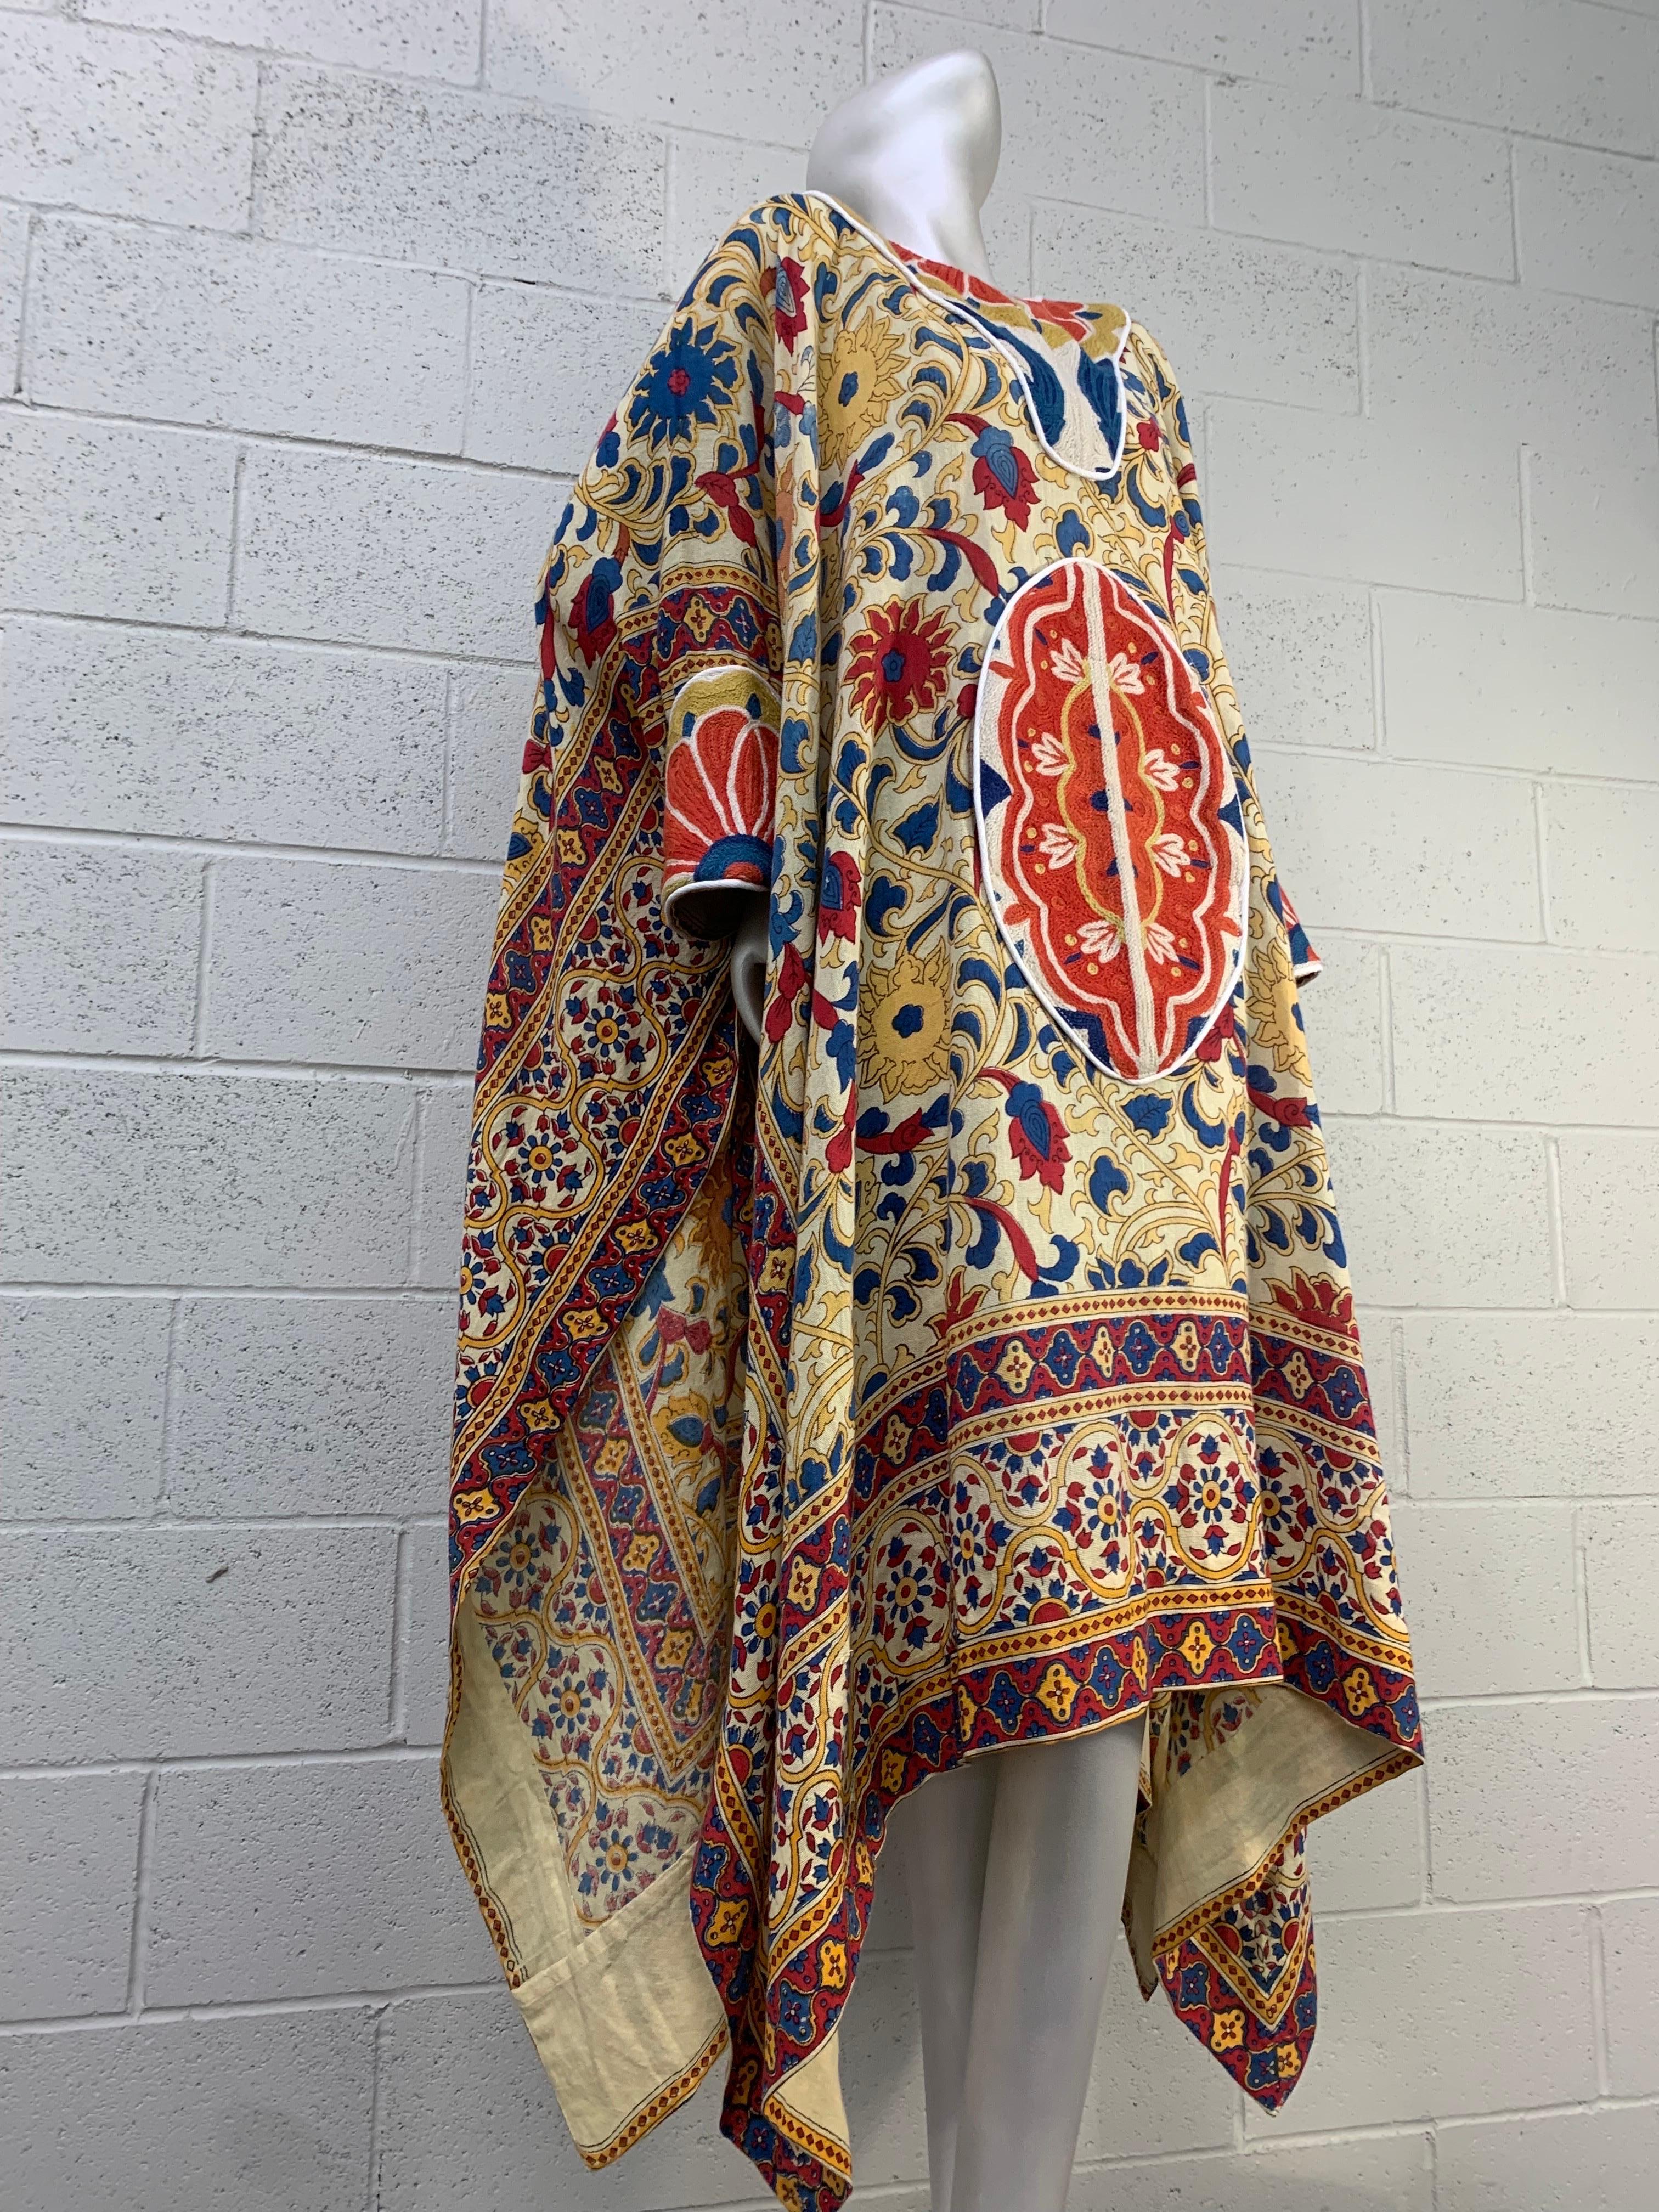 Torso Creations Tree Of Life Print Cotton Caftan w Crewel Embroidery and Piping: White cotton piping edges the neck panel as well as the front pouch pocket panel covered in a floral crewel stitch. Back of caftan also features a large central floral